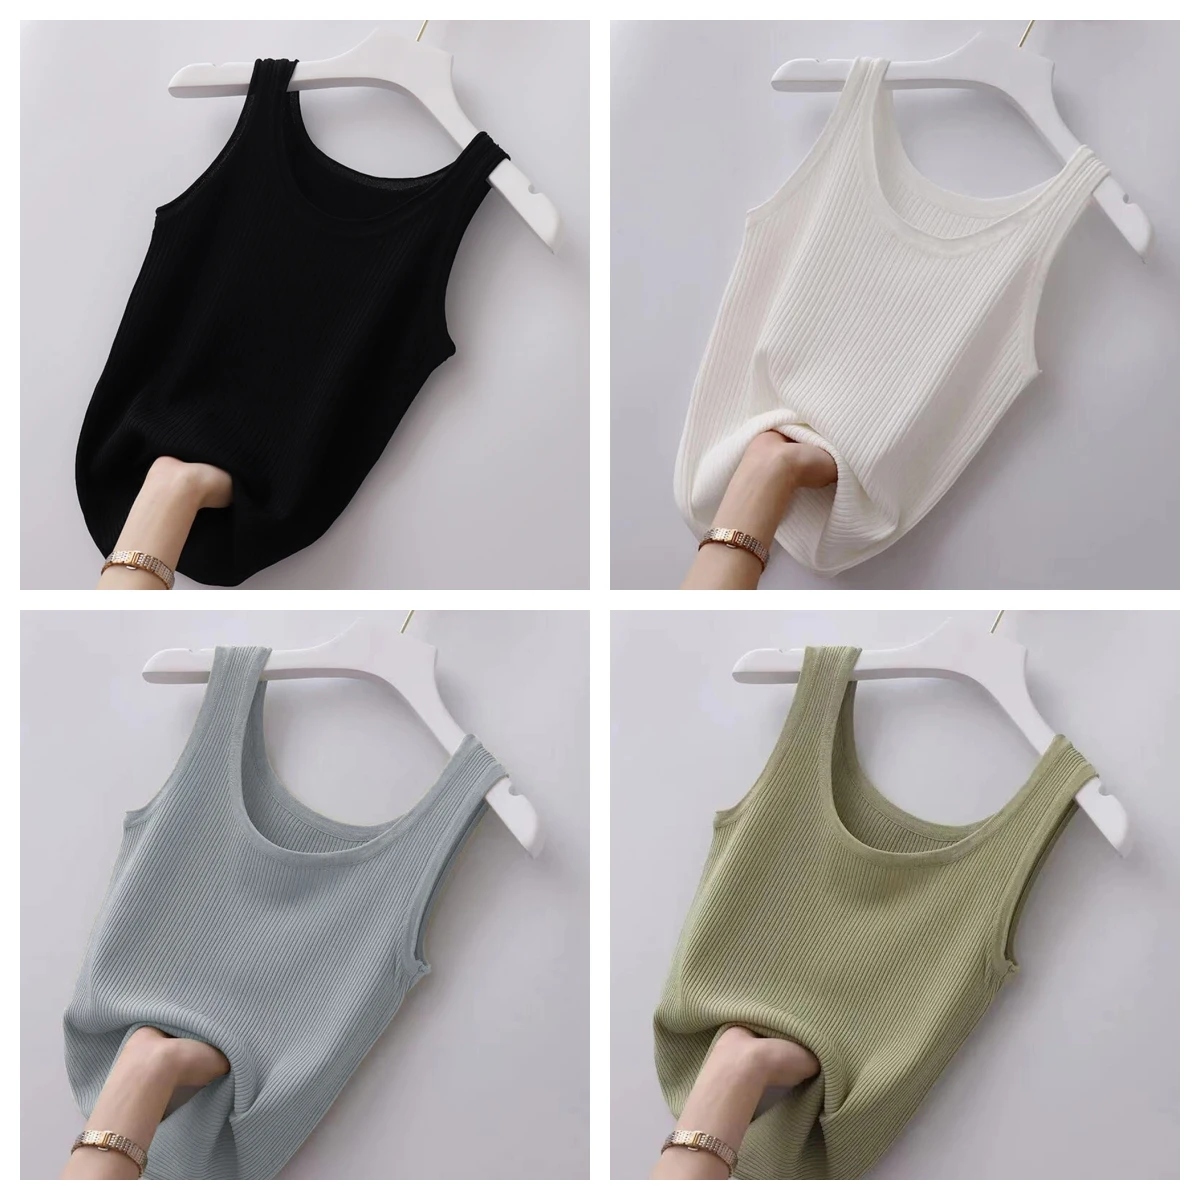 

Threaded Vests for Women Fashion Women Tank Top Tees Sleeveless Female T-Shirts Casual Soild Color Tees Tank Women Clothing